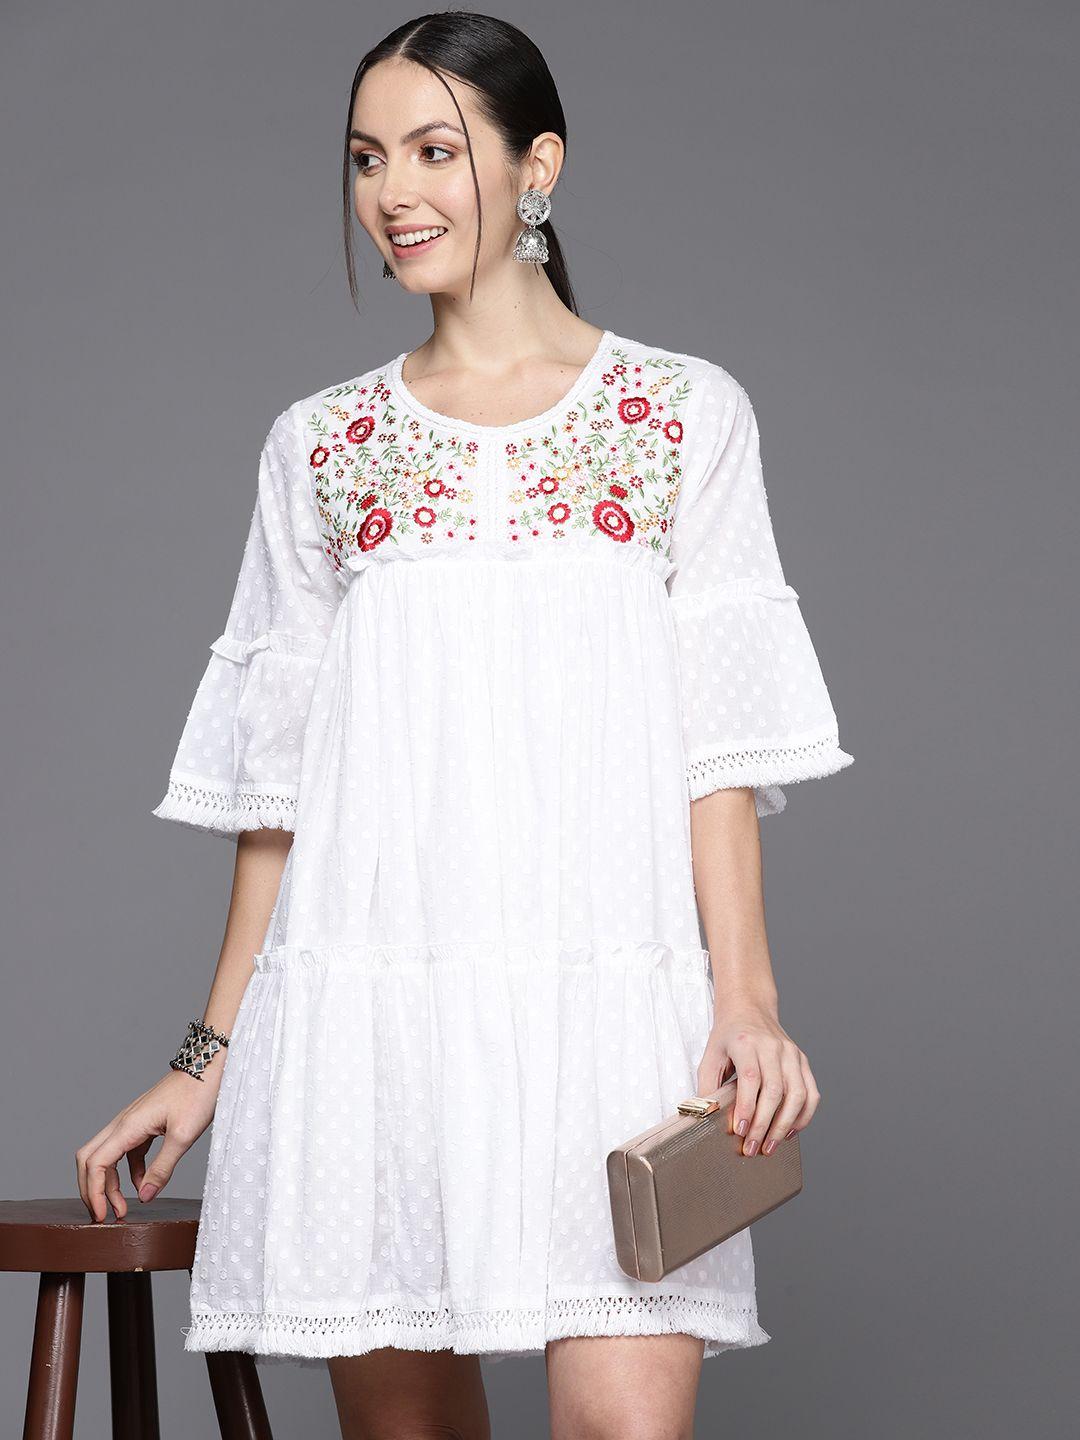 indo-era-floral-embroidered-flared-sleeves-fringed-a-line-dress